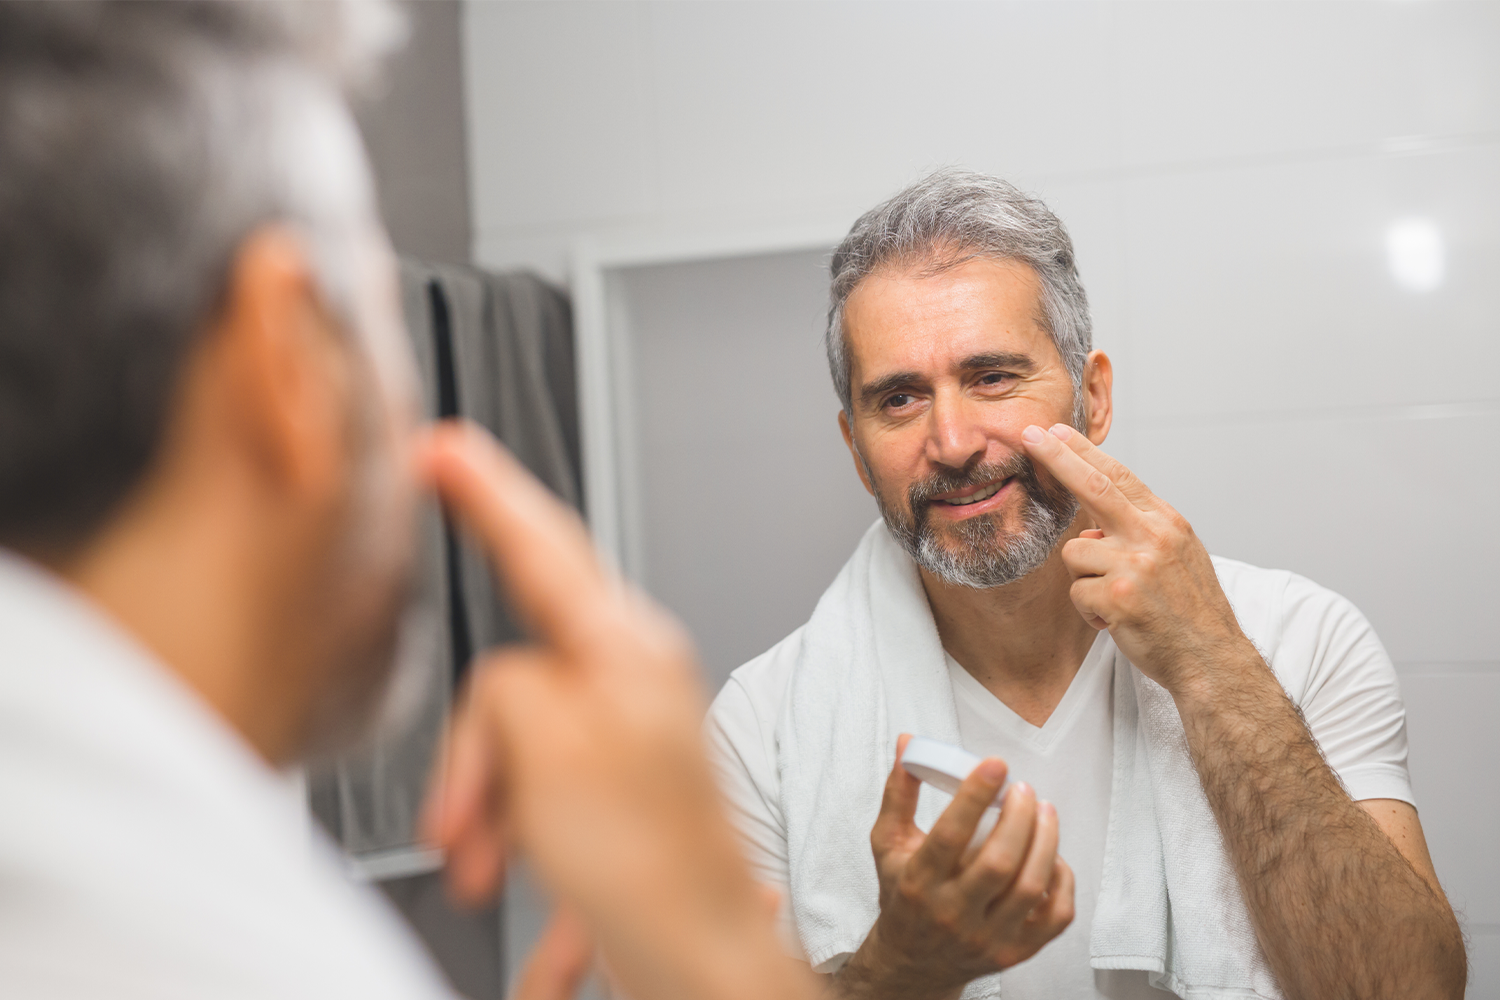 Anti-Aging for Men: 7 Tips to Looking Younger